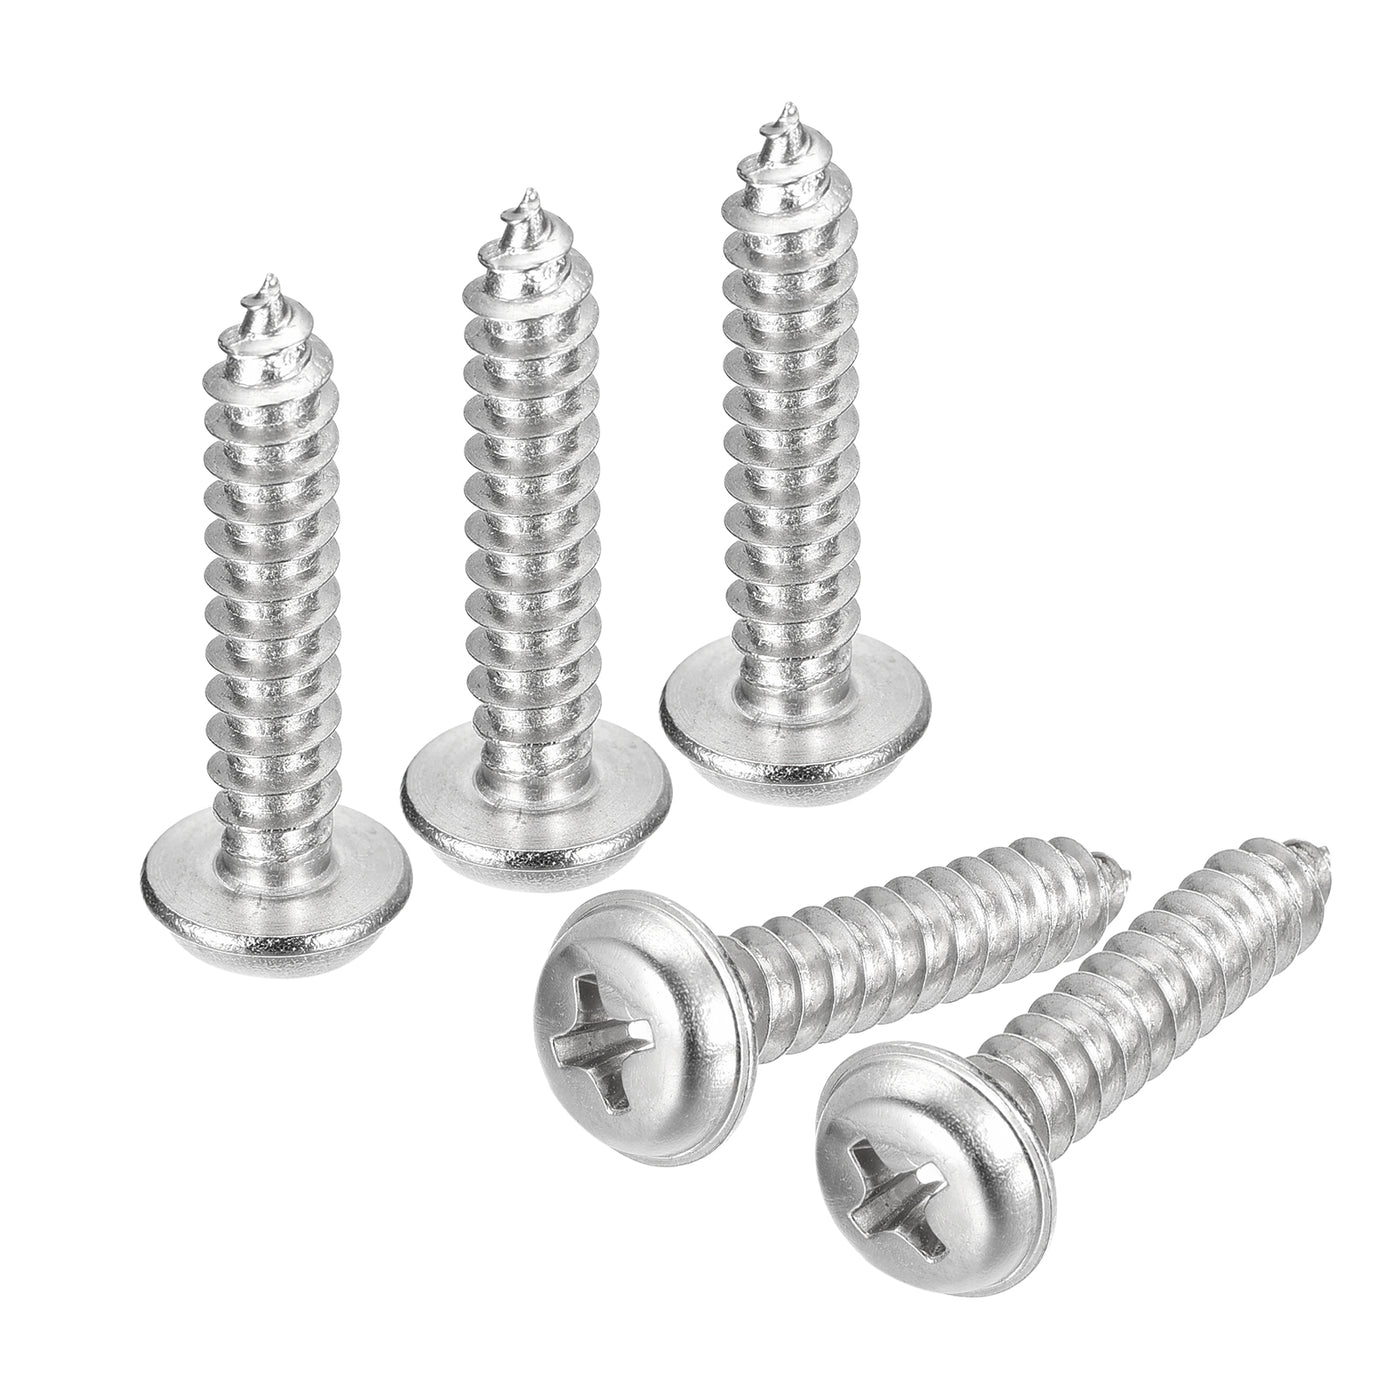 uxcell Uxcell ST5x25mm Phillips Pan Head Self-tapping Screw with Washer, 50pcs - 304 Stainless Steel Wood Screw Full Thread (Silver)